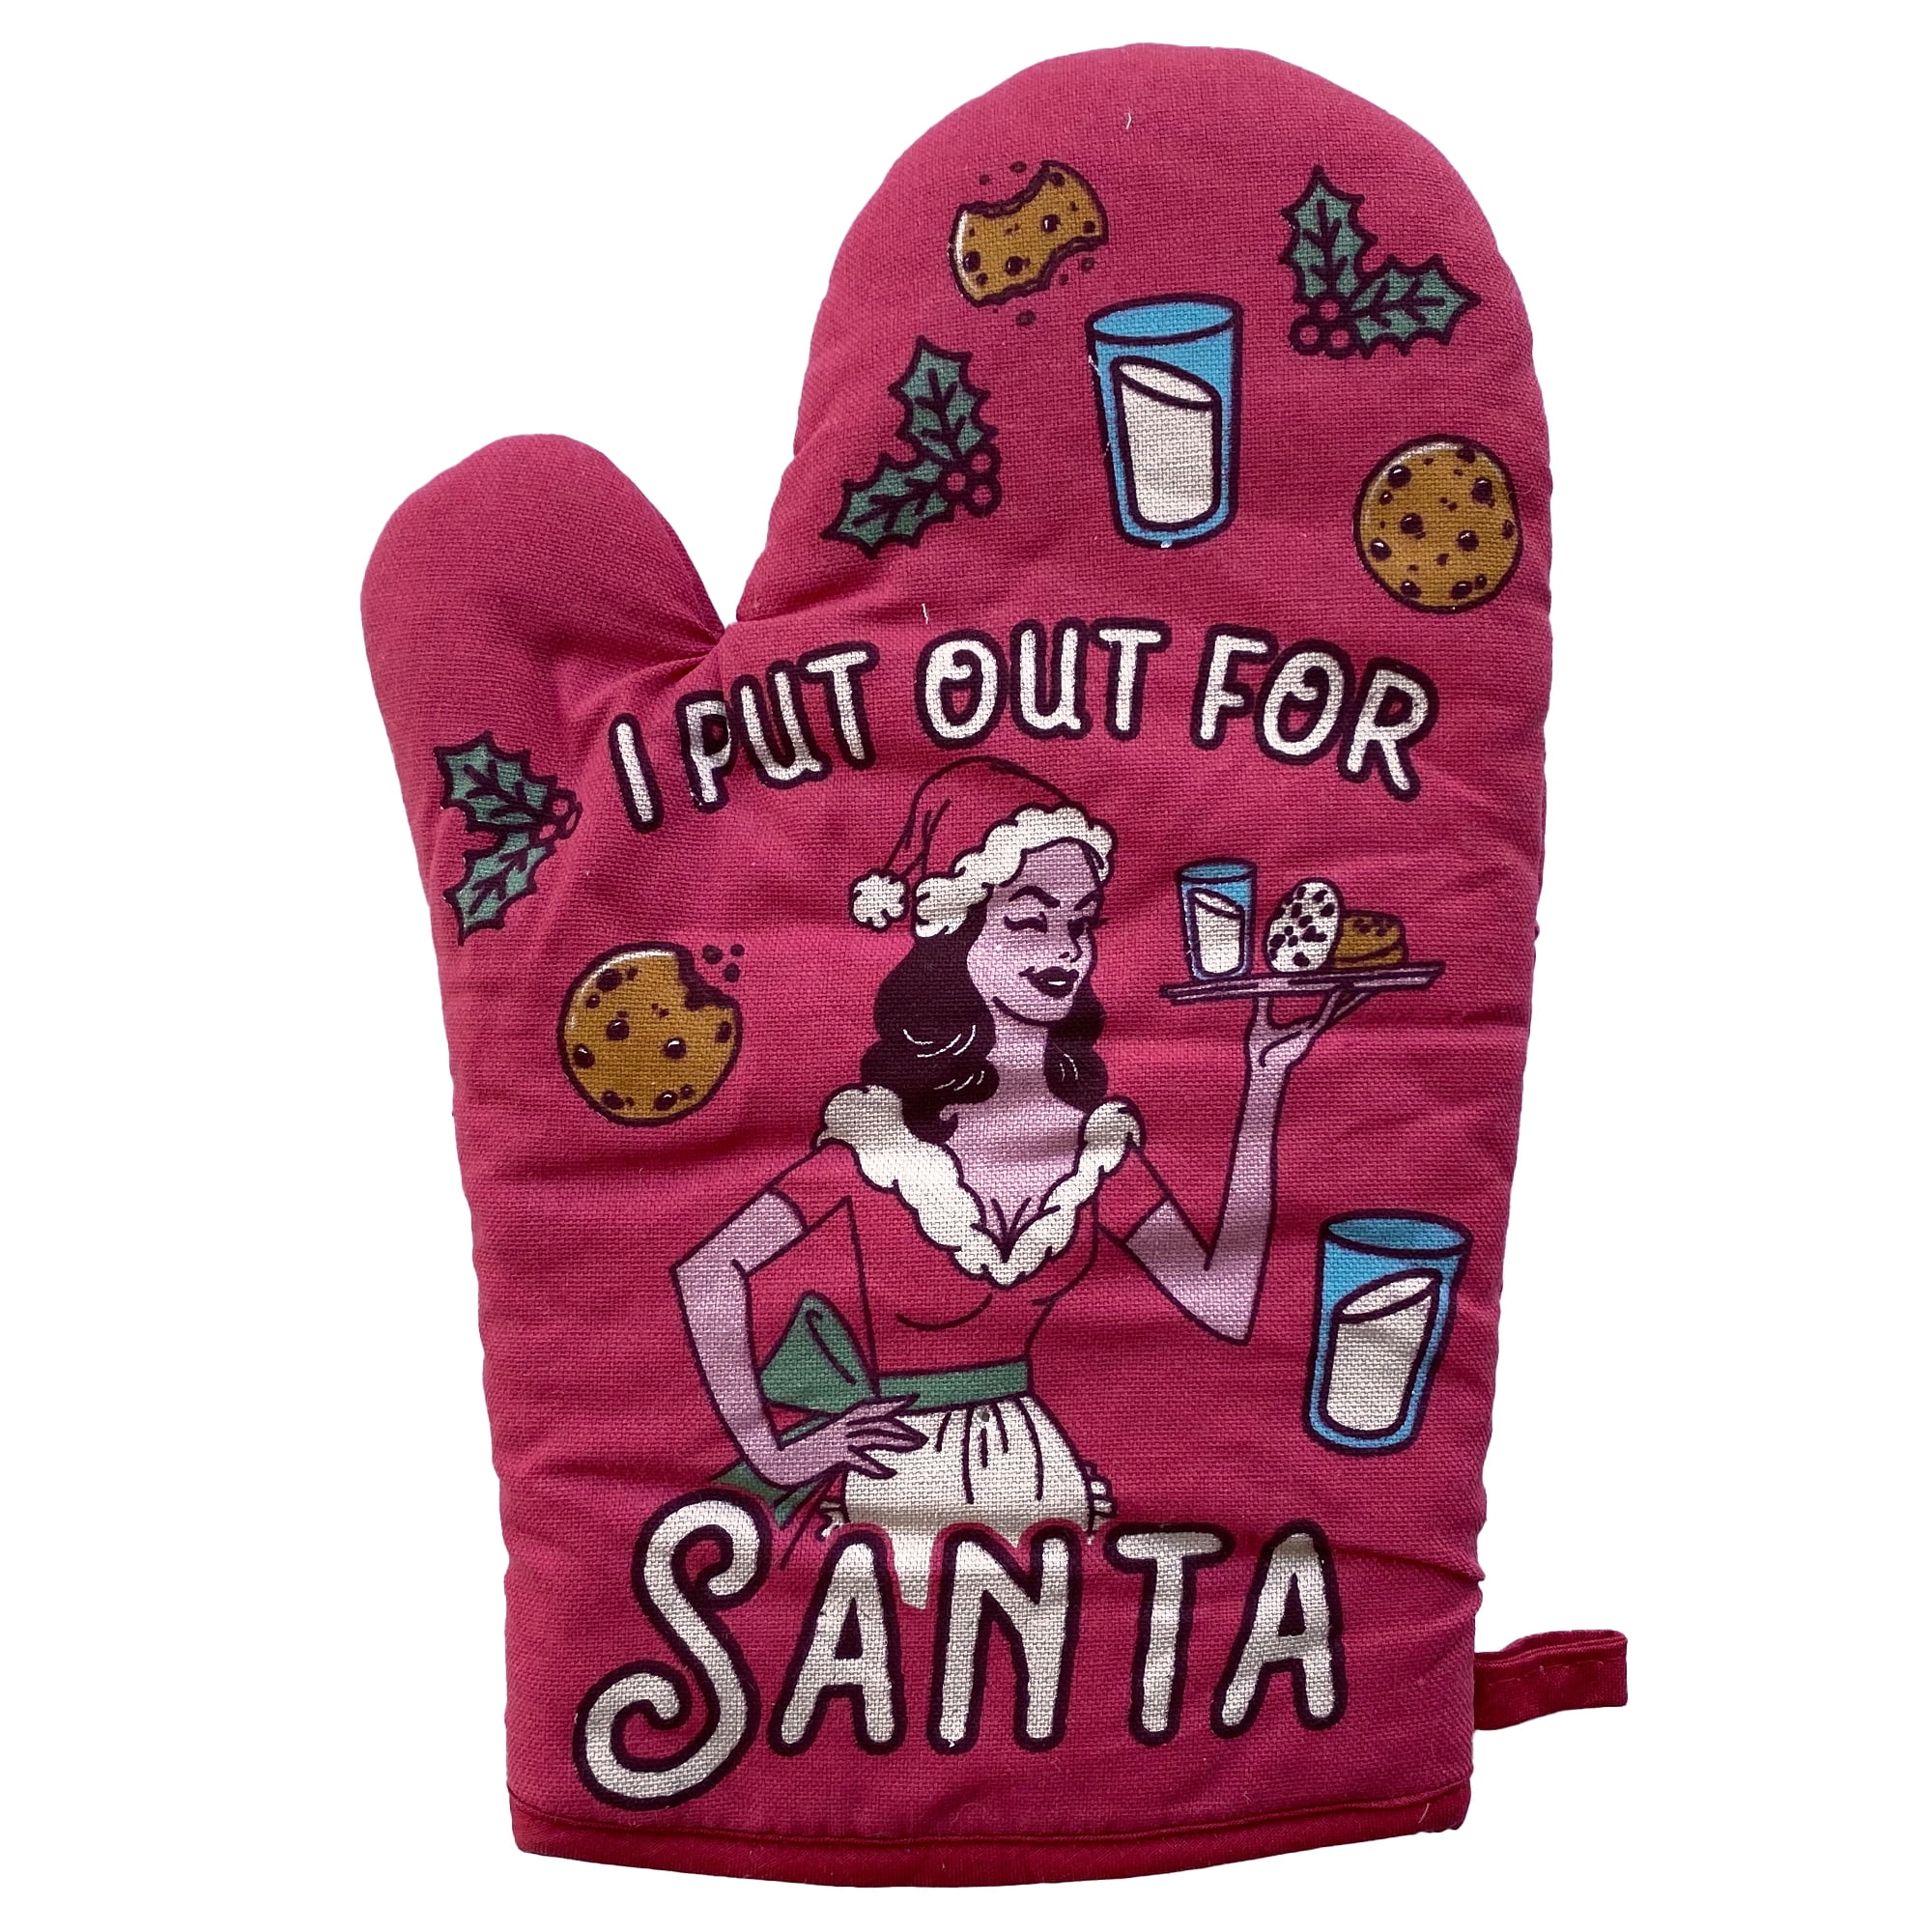 Kitchen Style Printed 'Cupcakes' Oven Mitt (Pink)